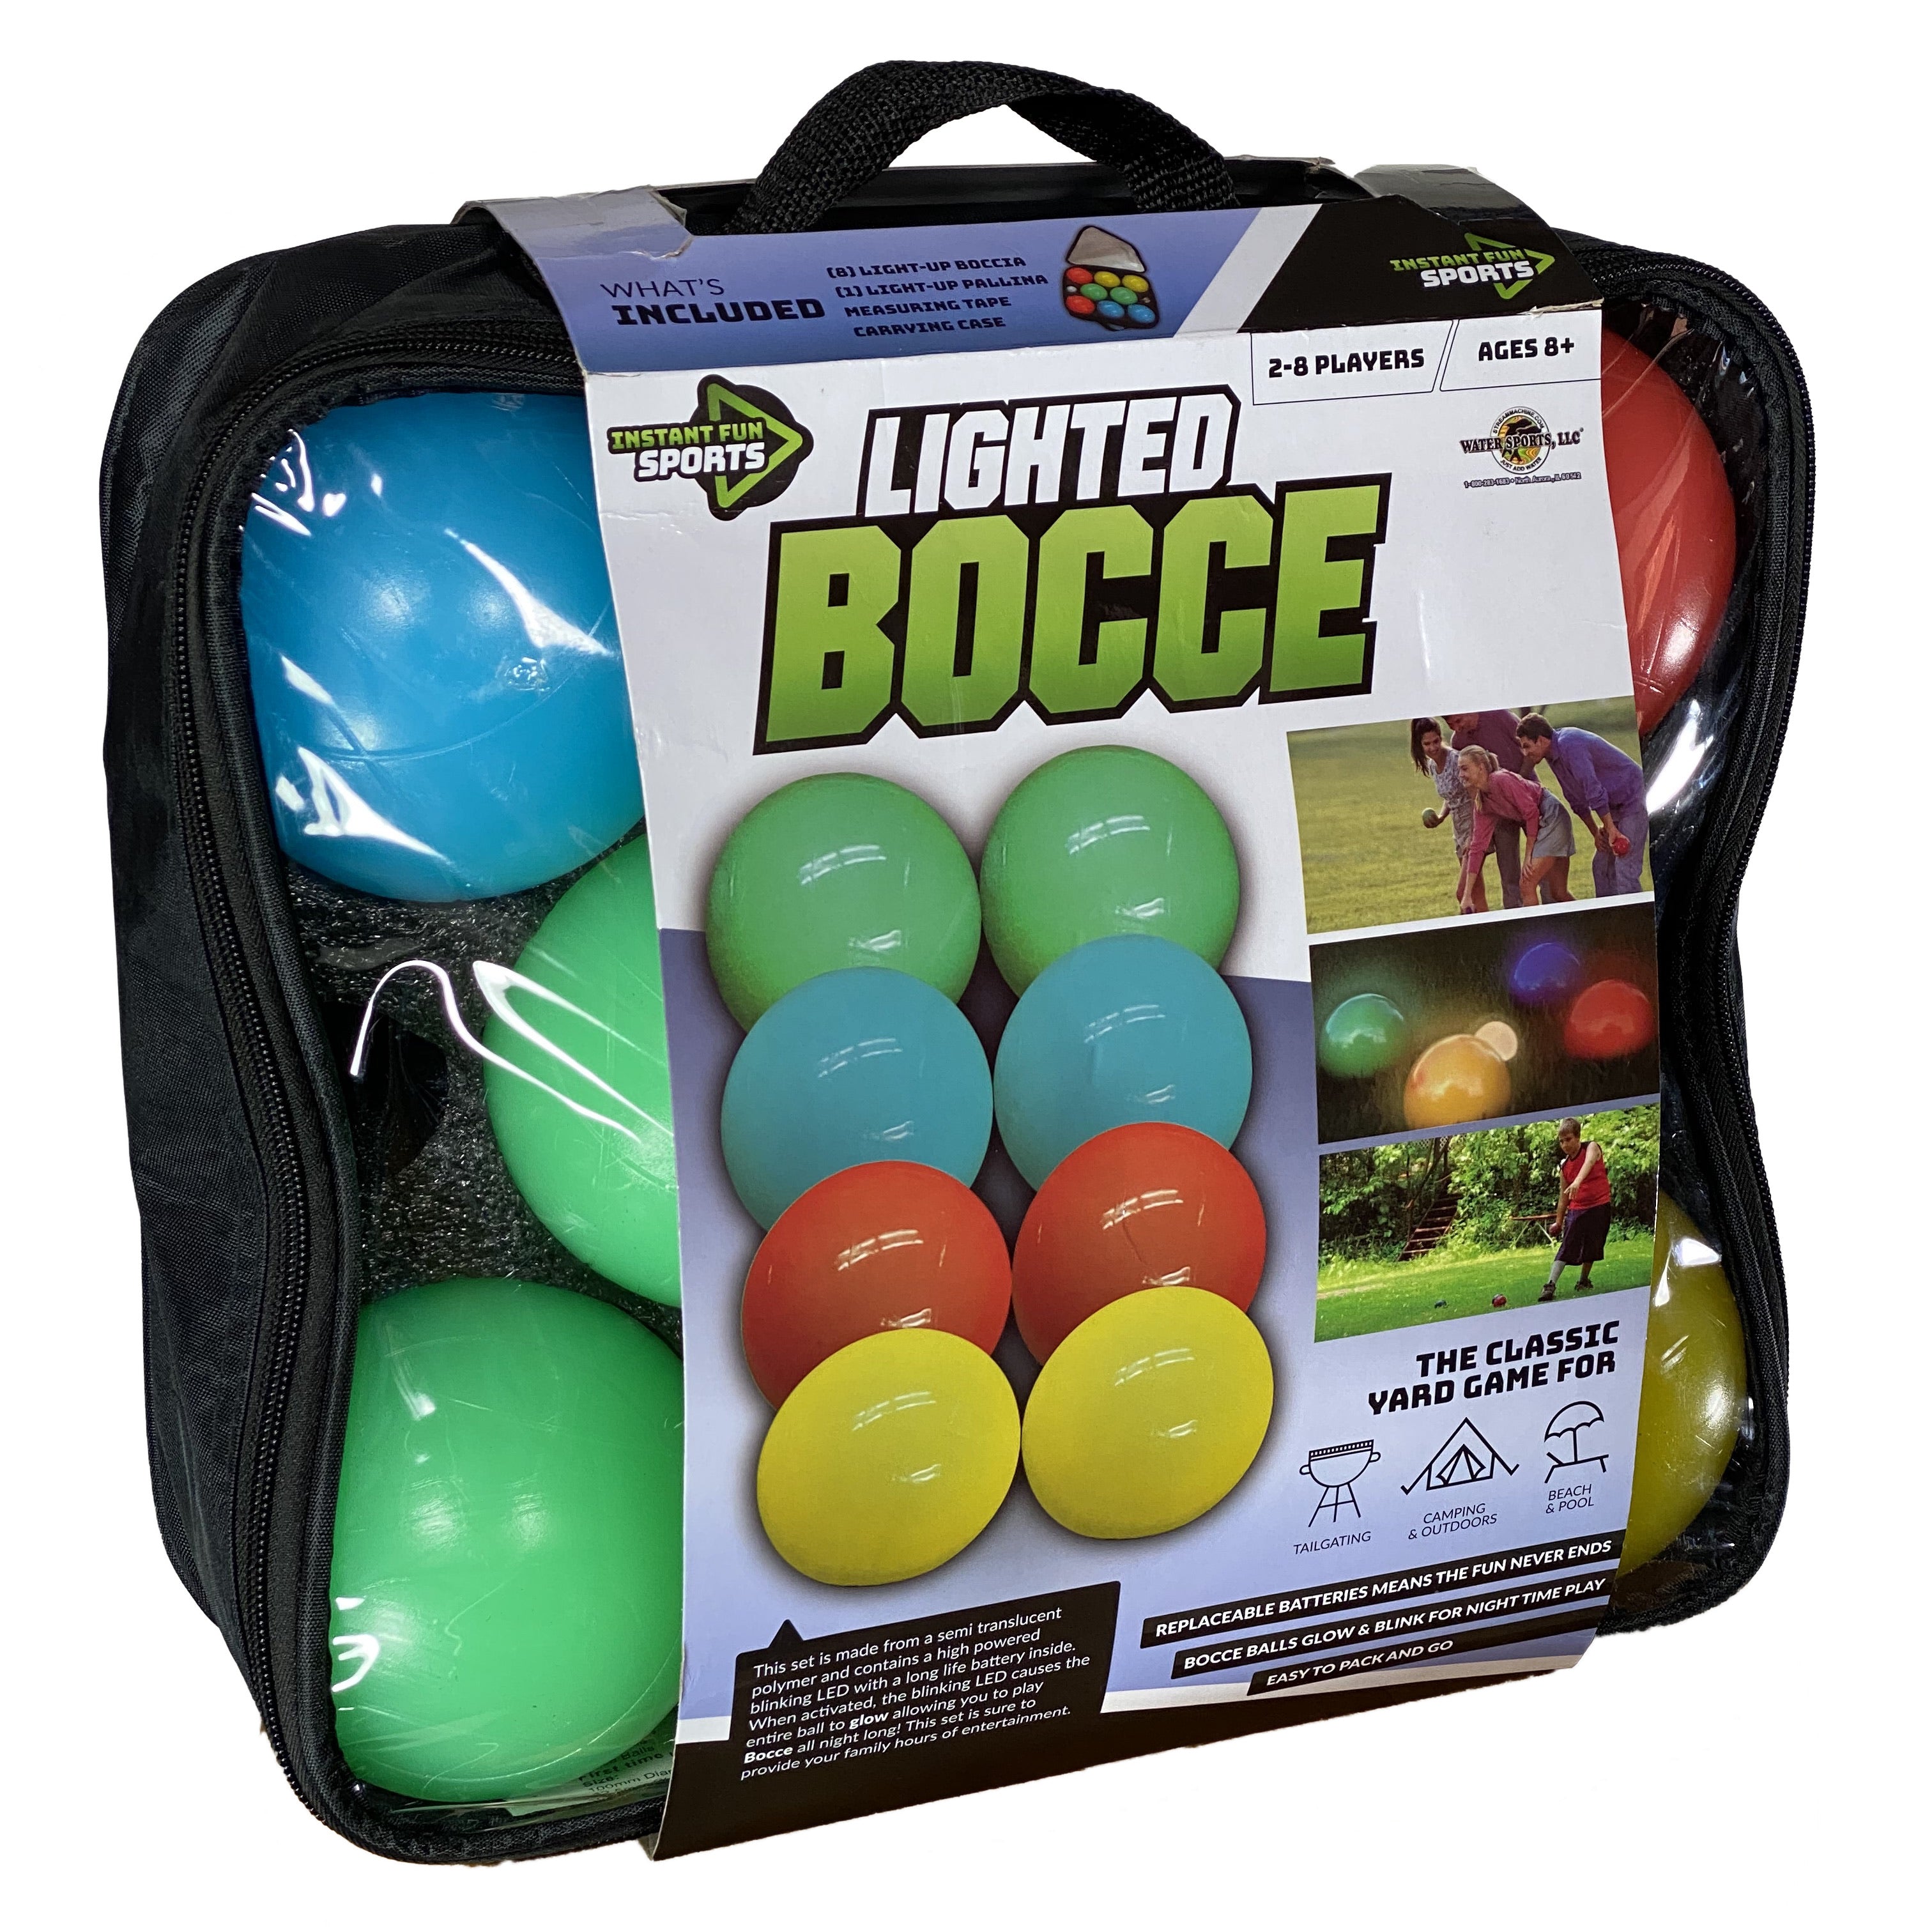 Lighted Bocce Ball Game    